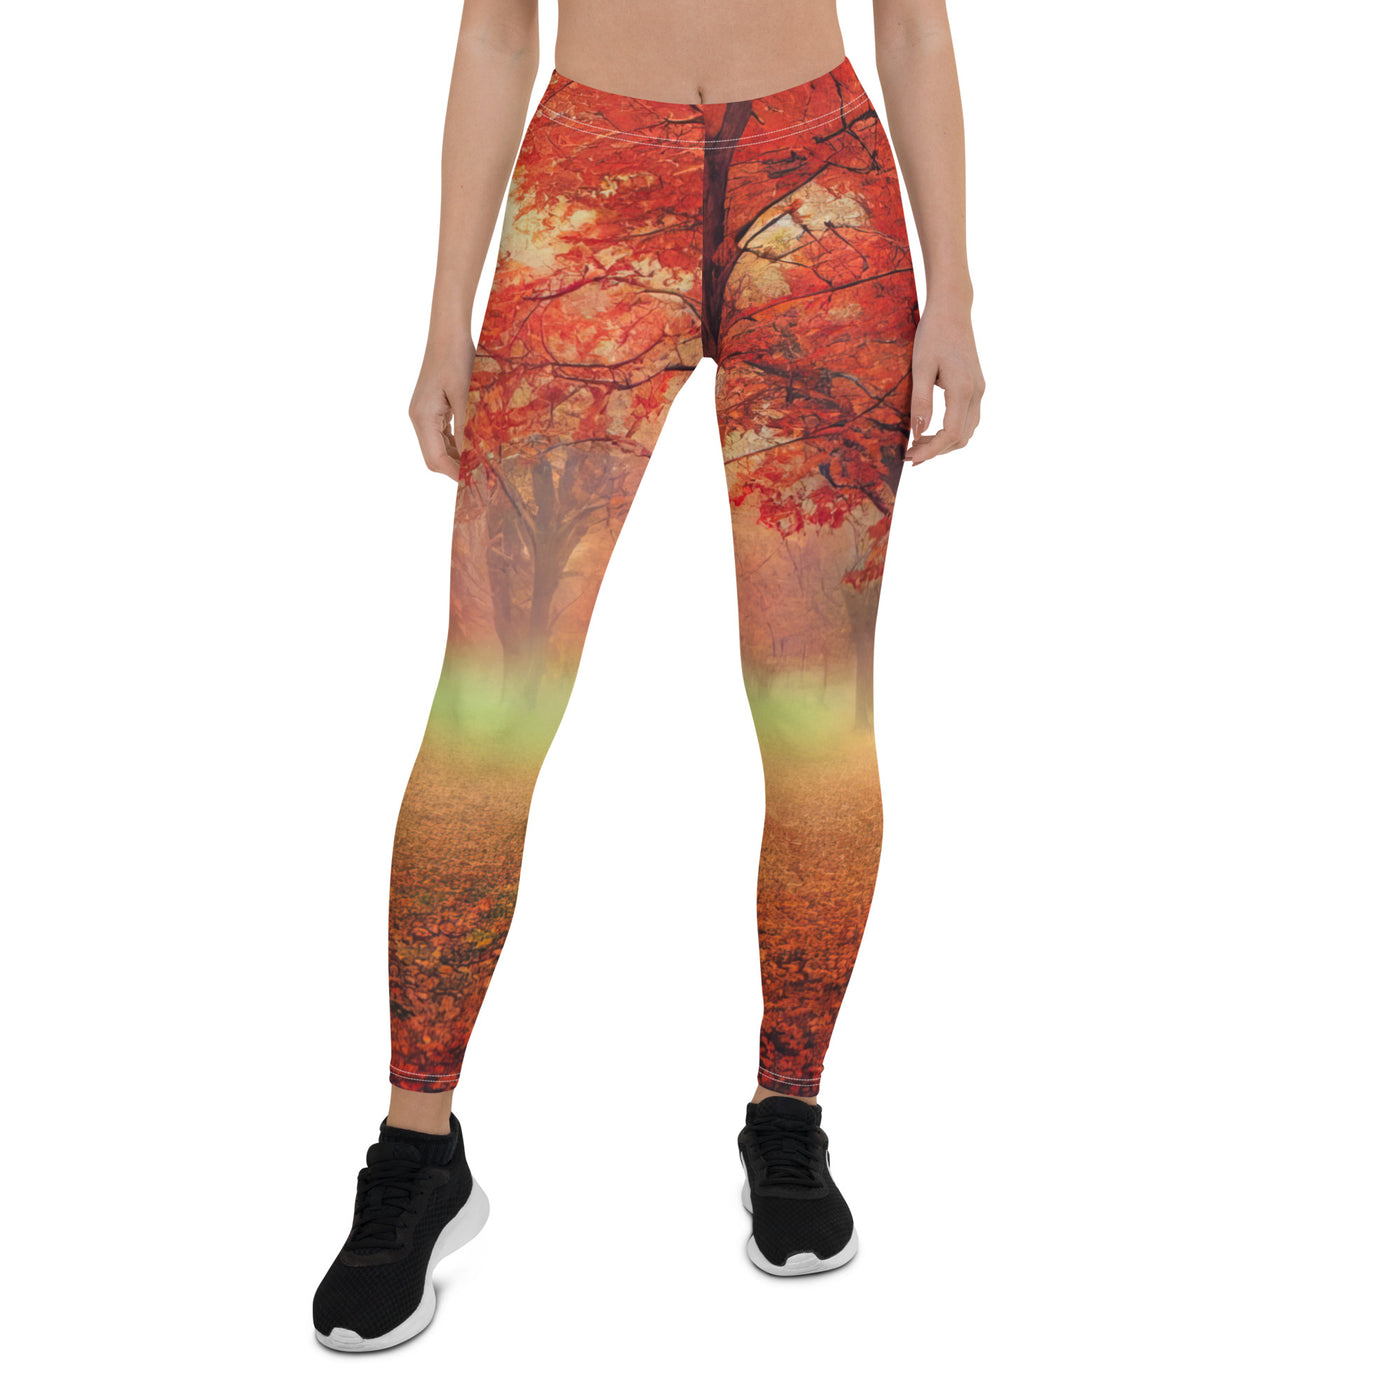 Wald im Herbst - Rote Herbstblätter - Leggings (All-Over Print) camping xxx XL